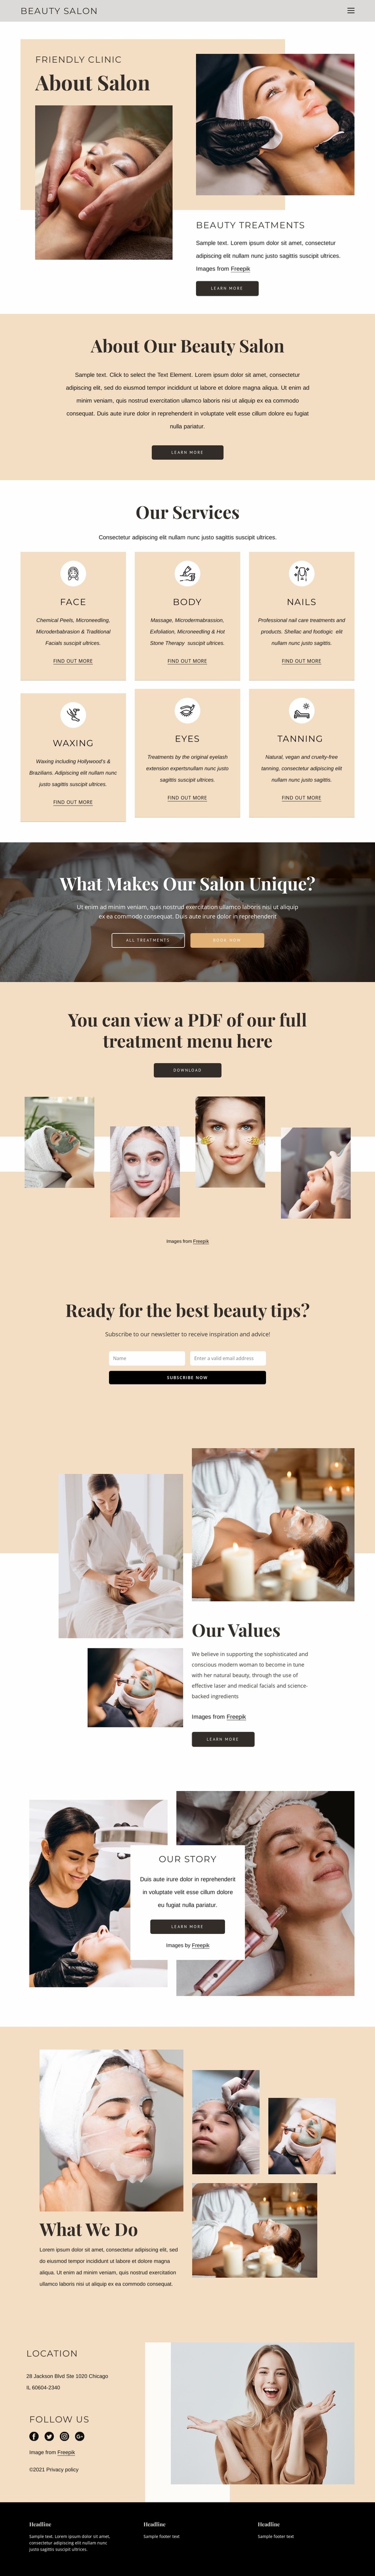 Beauty and aesthetic treatments Landing Page